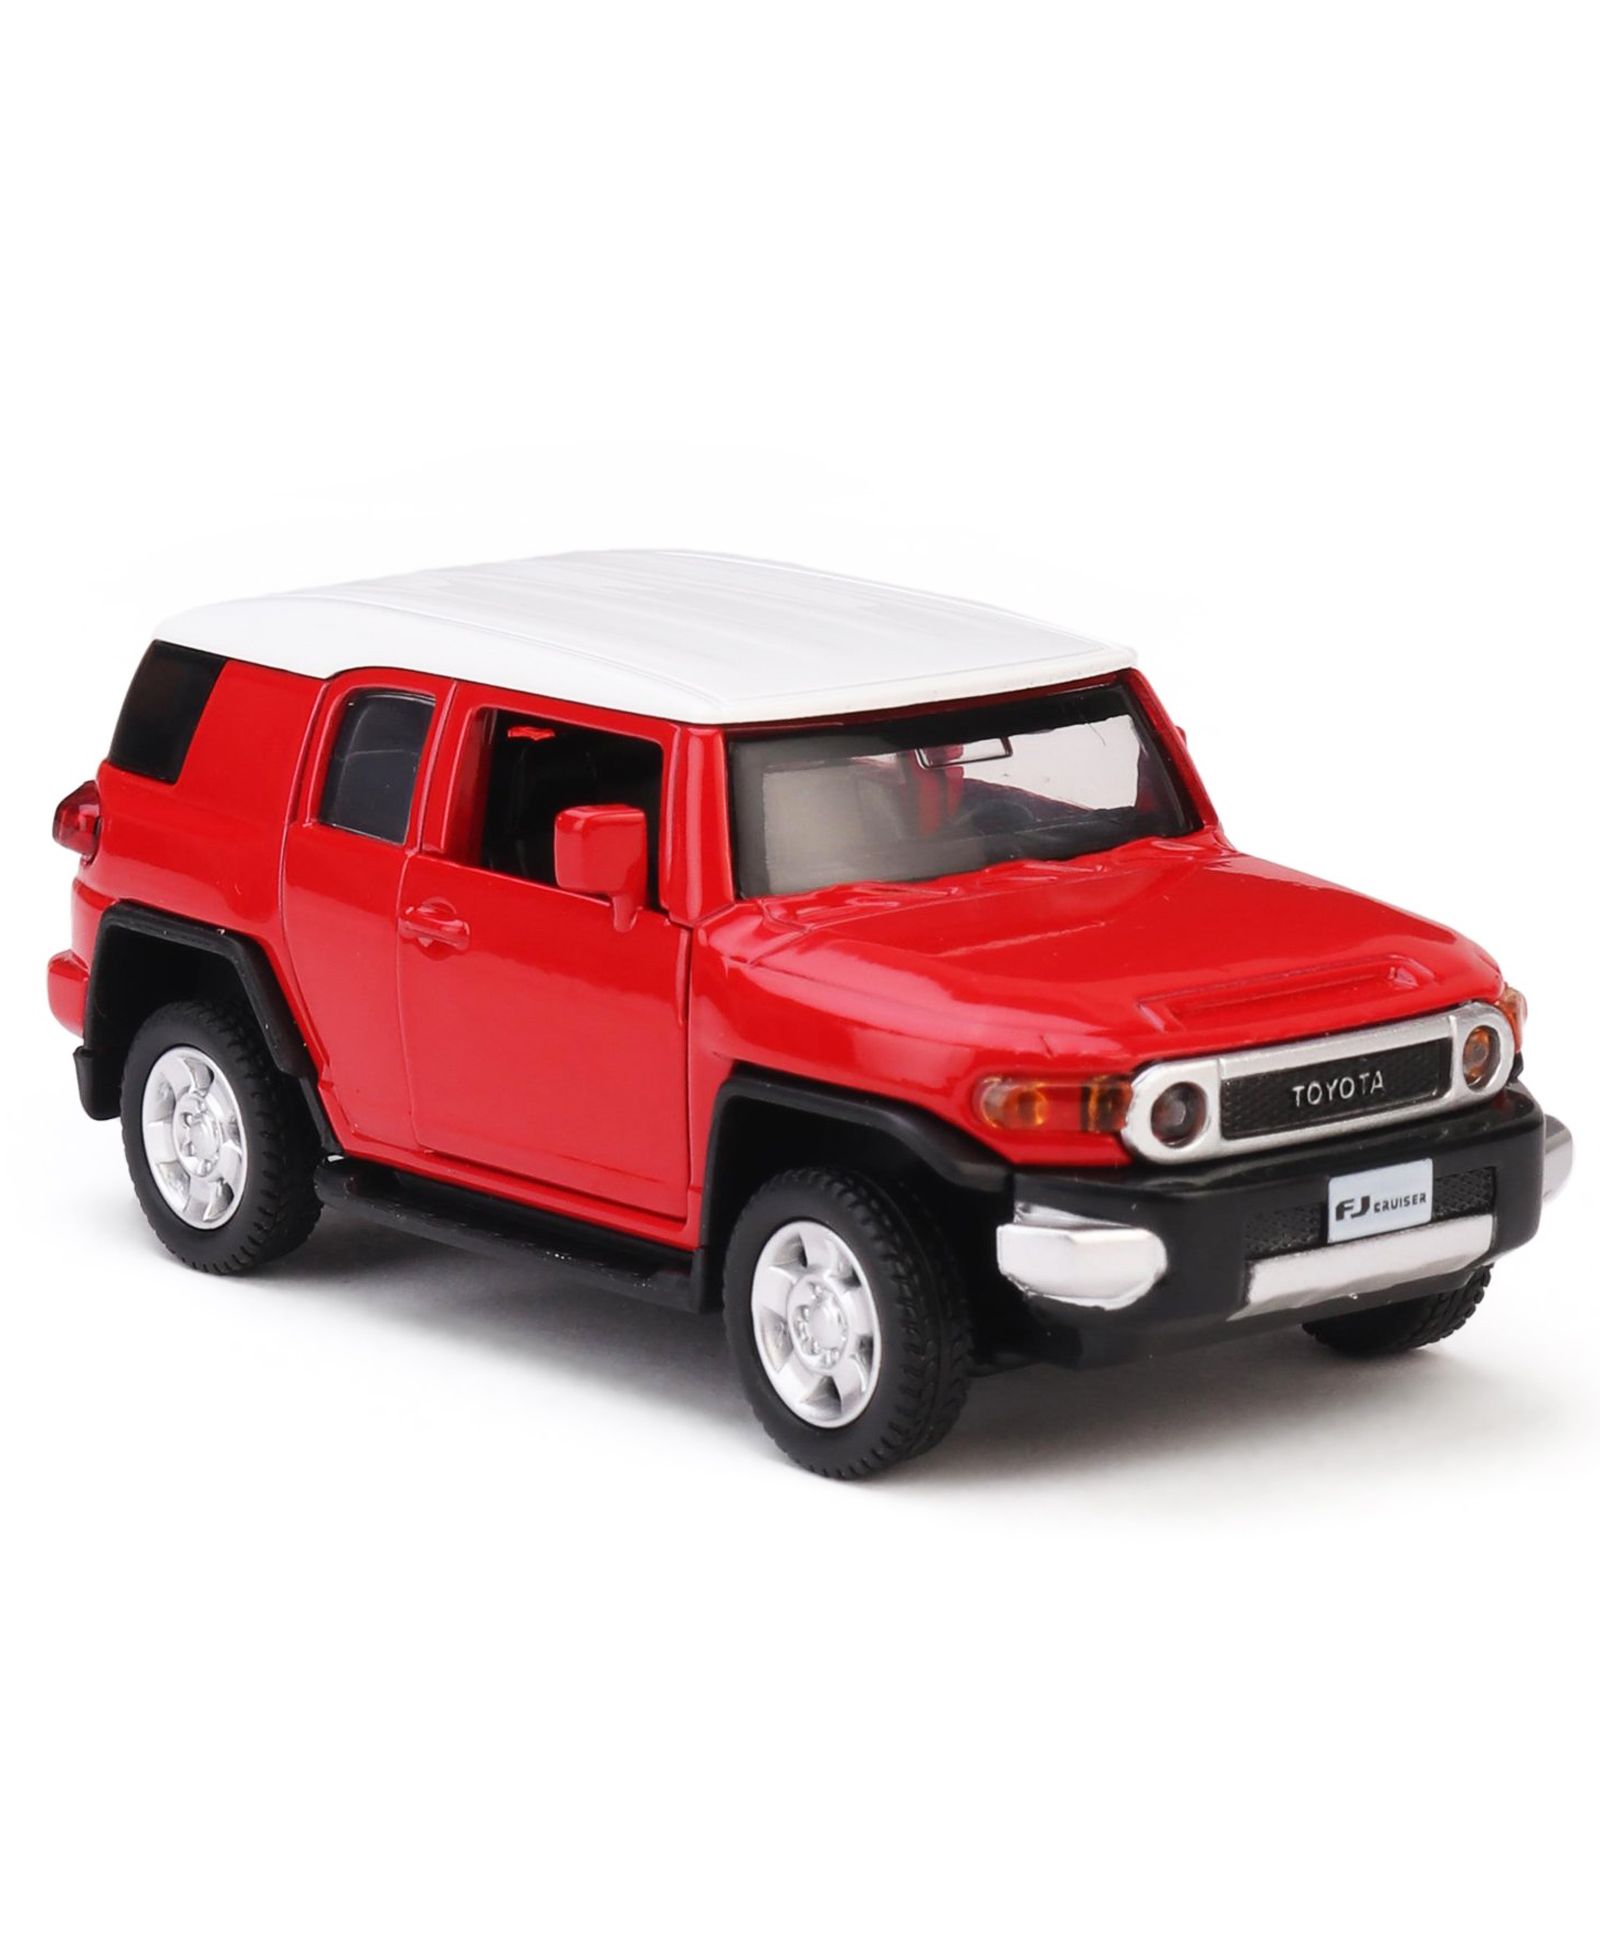 Innovador Die Cast Pull Back Action Toyota Fj Cruiser Toy Car Jeep